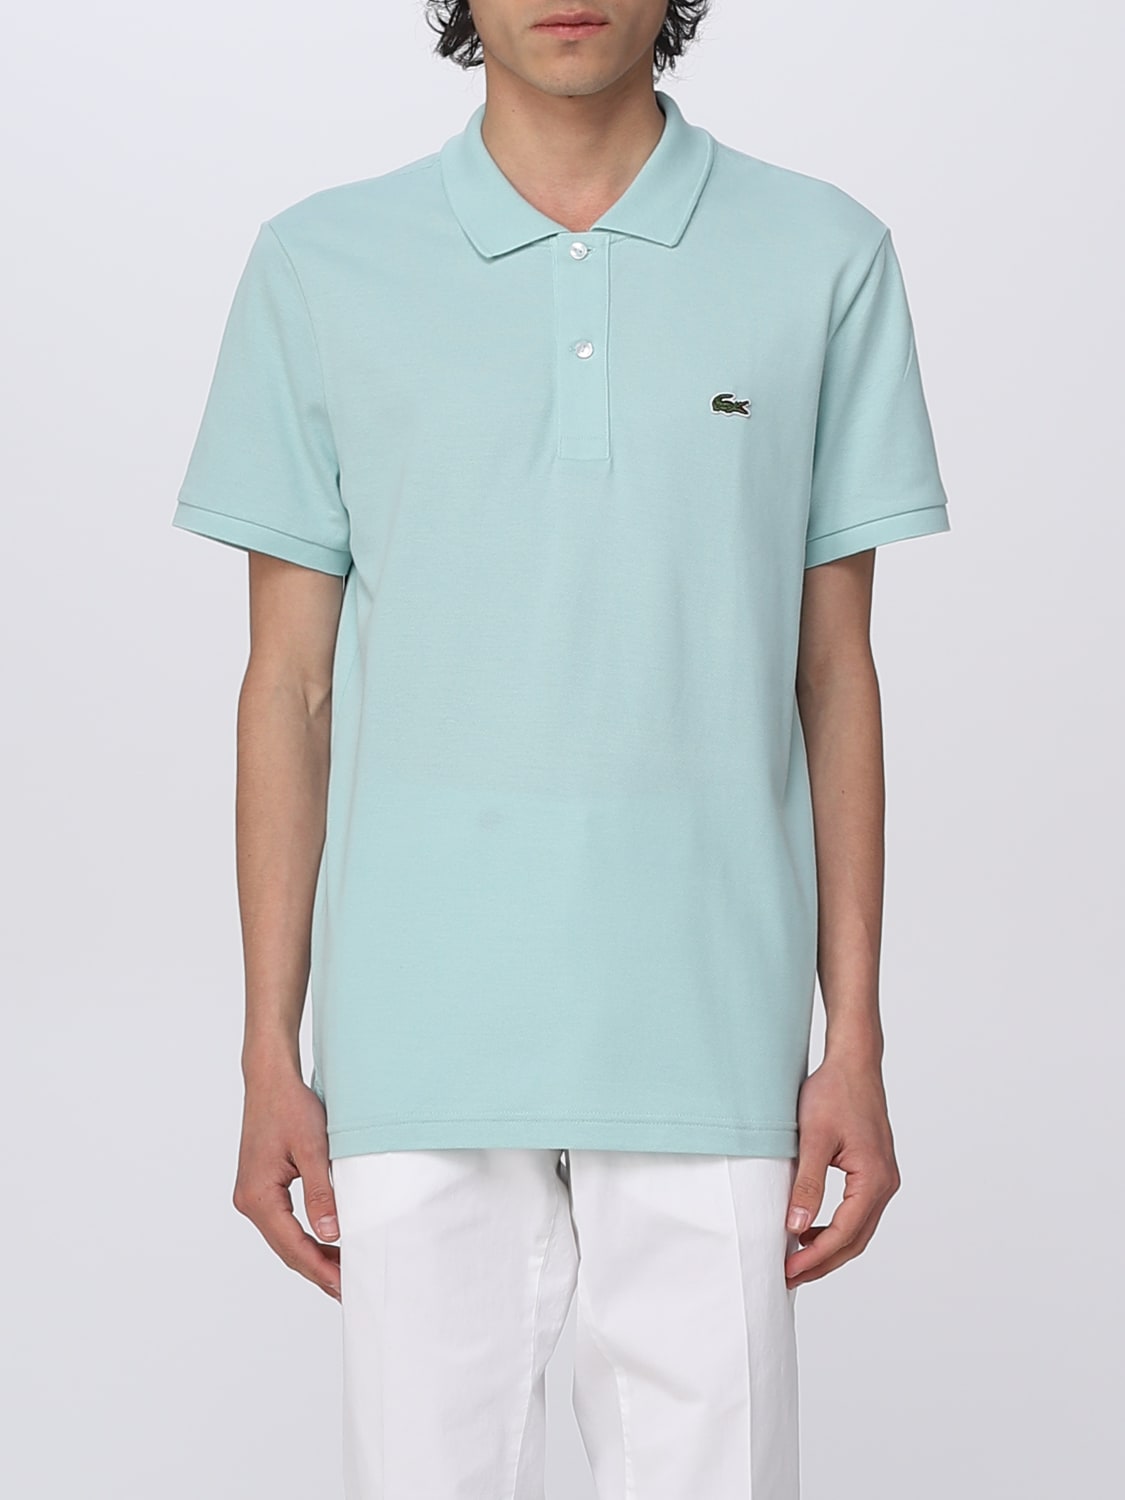 praktiseret Monica animation LACOSTE: polo shirt for man - Sage | Lacoste polo shirt PH4012 online on  GIGLIO.COM